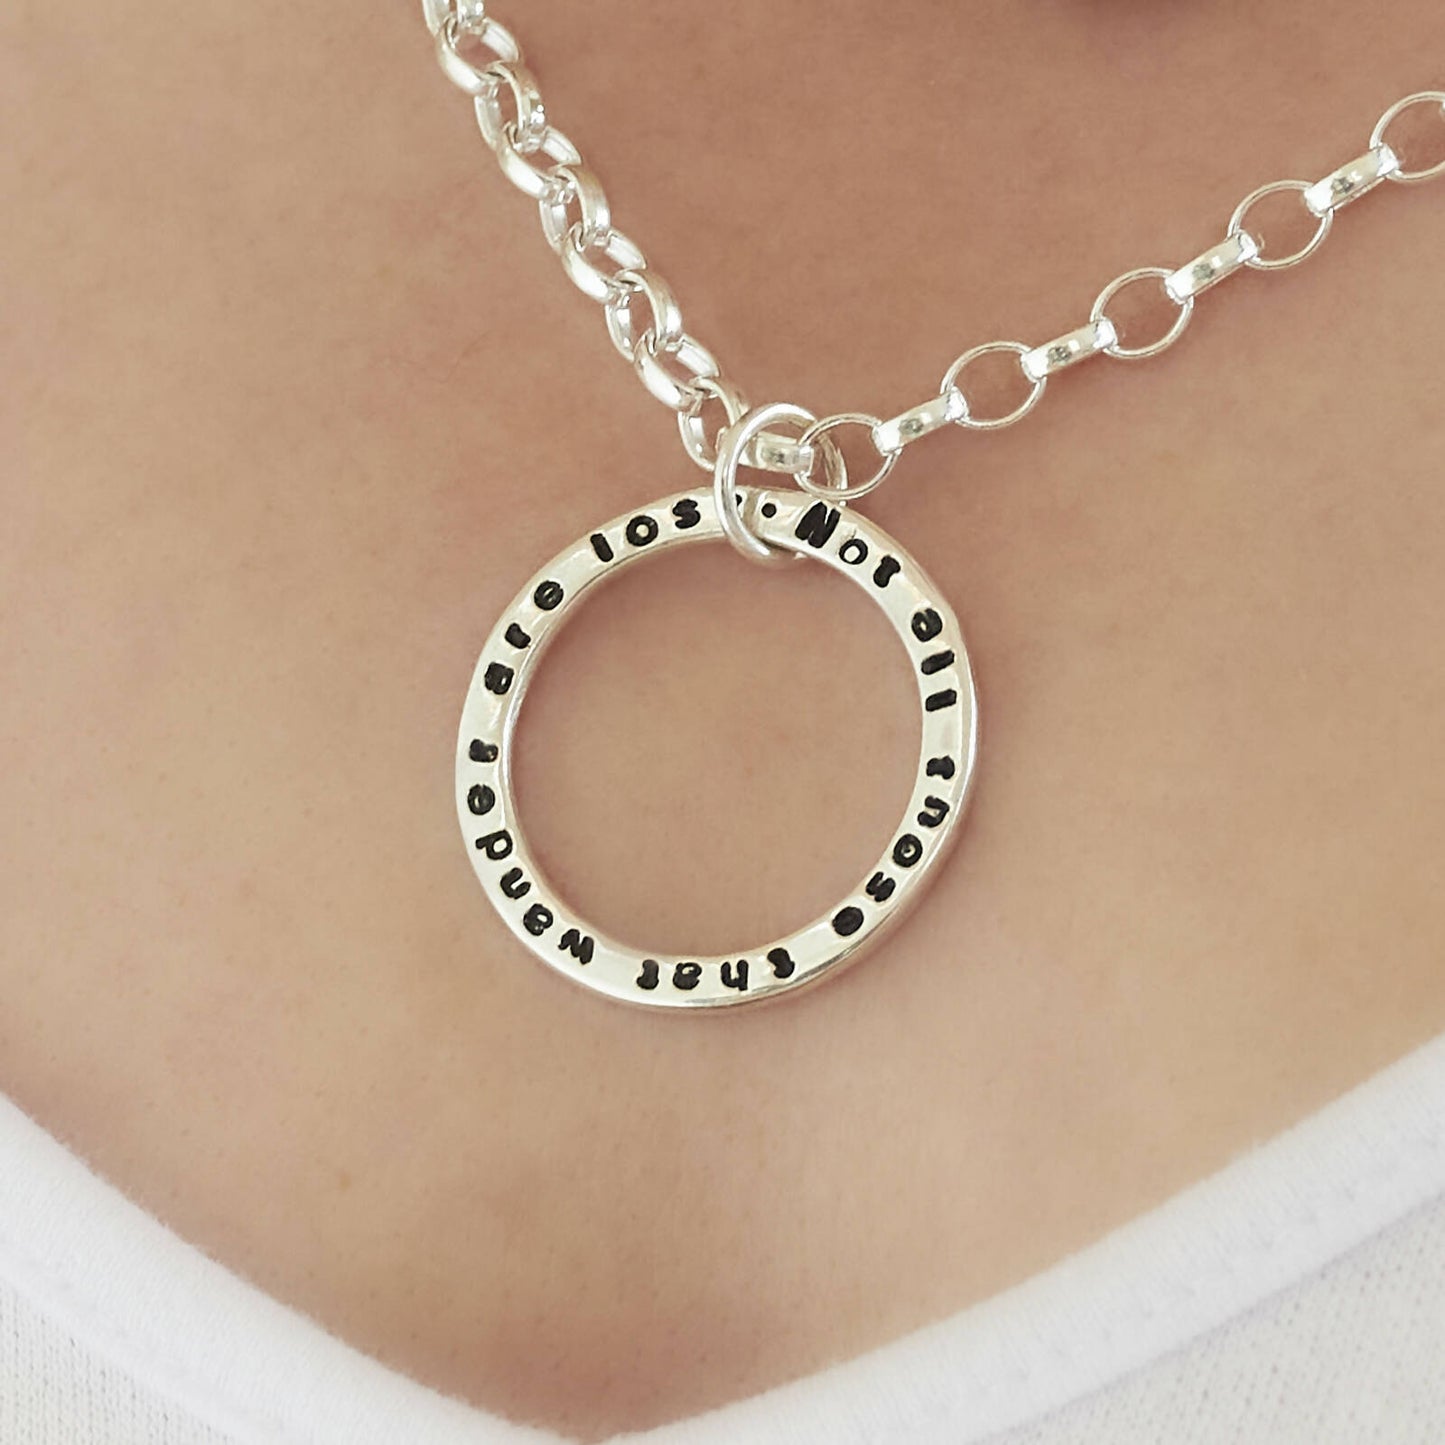 The 'All That Wander' Personalised Necklace by Emma White